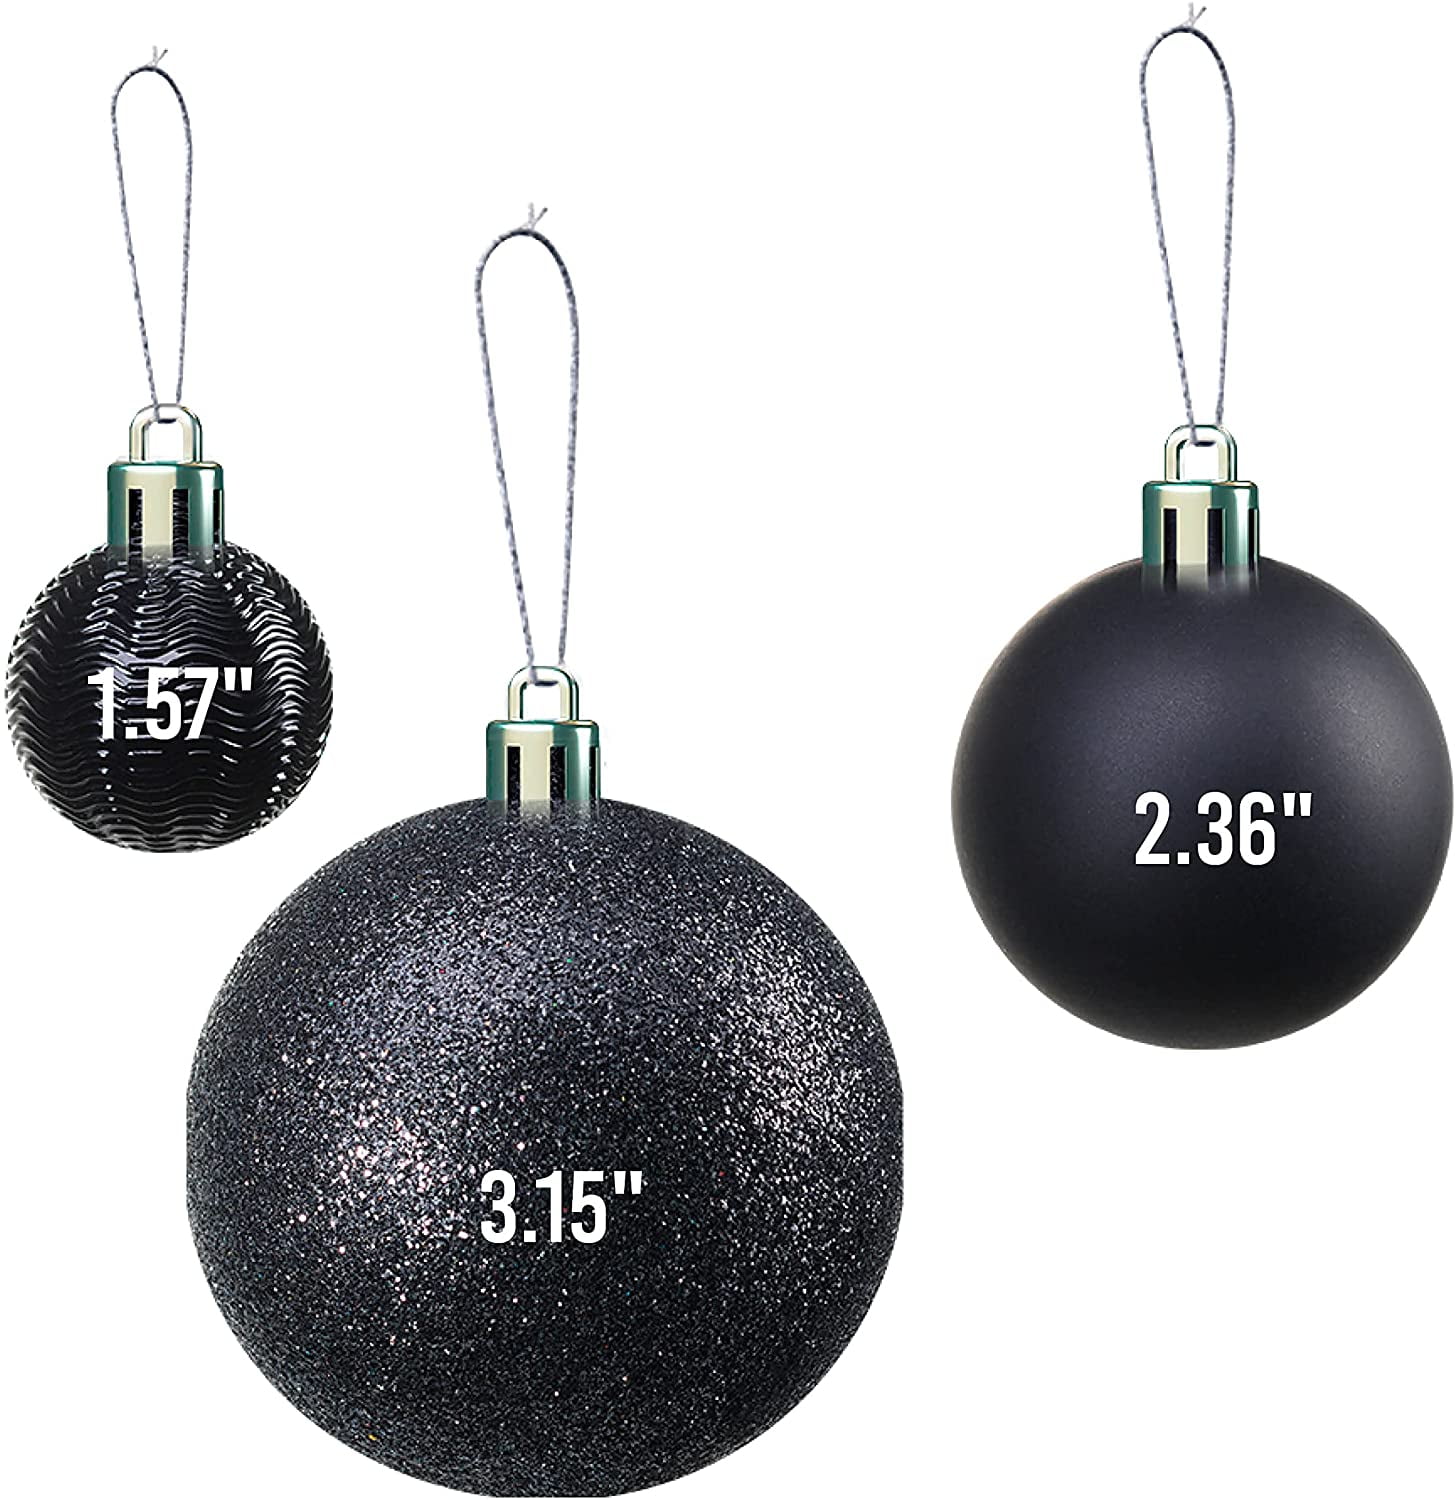 EXCEART 40 Pcs Christmas Ball Cover Exquisite Ball Ornaments Covers  Christmas Ornament Hooks Ball Pendants Caps Round Christmas Ornament Caps  Balls